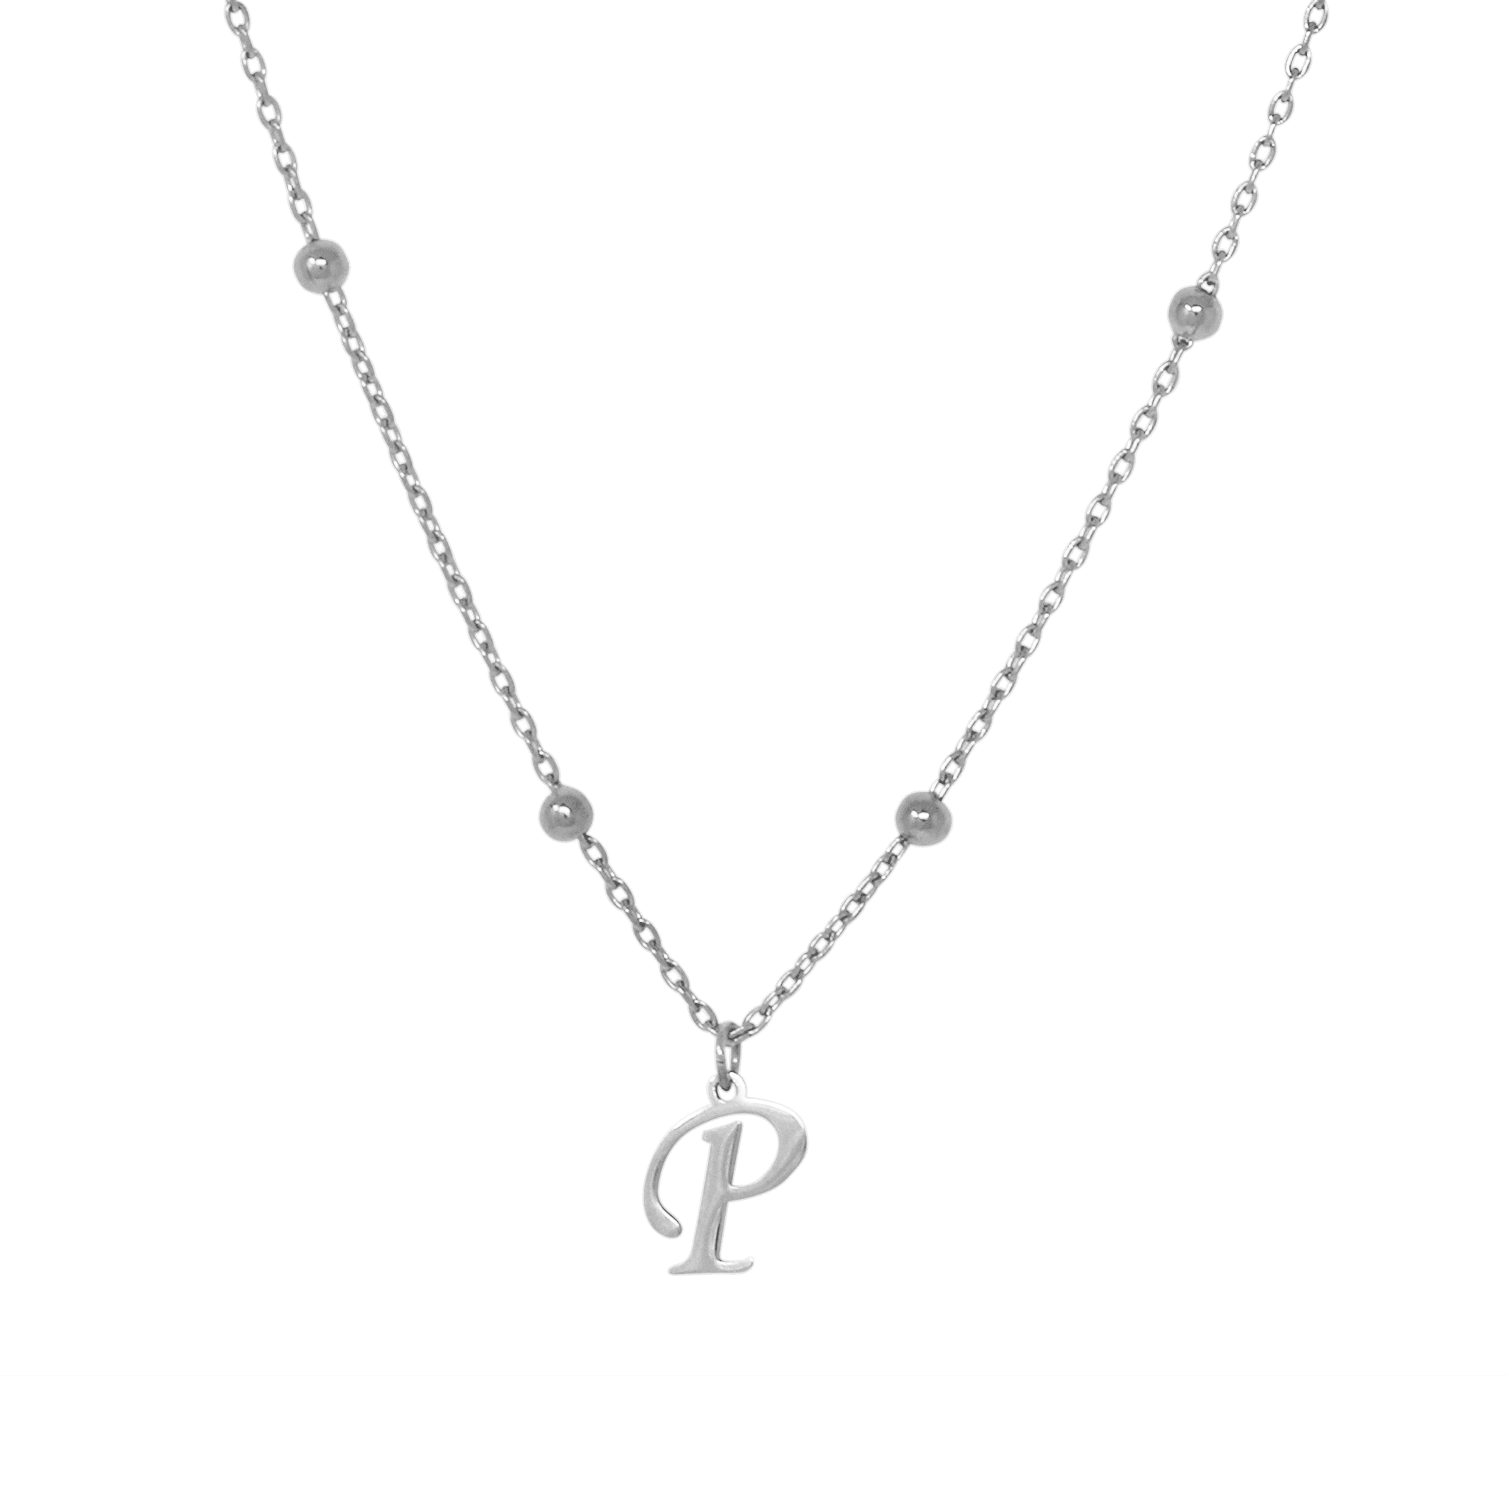 BohoMoon Stainless Steel Inspire Initial Necklace Silver / A / Necklace